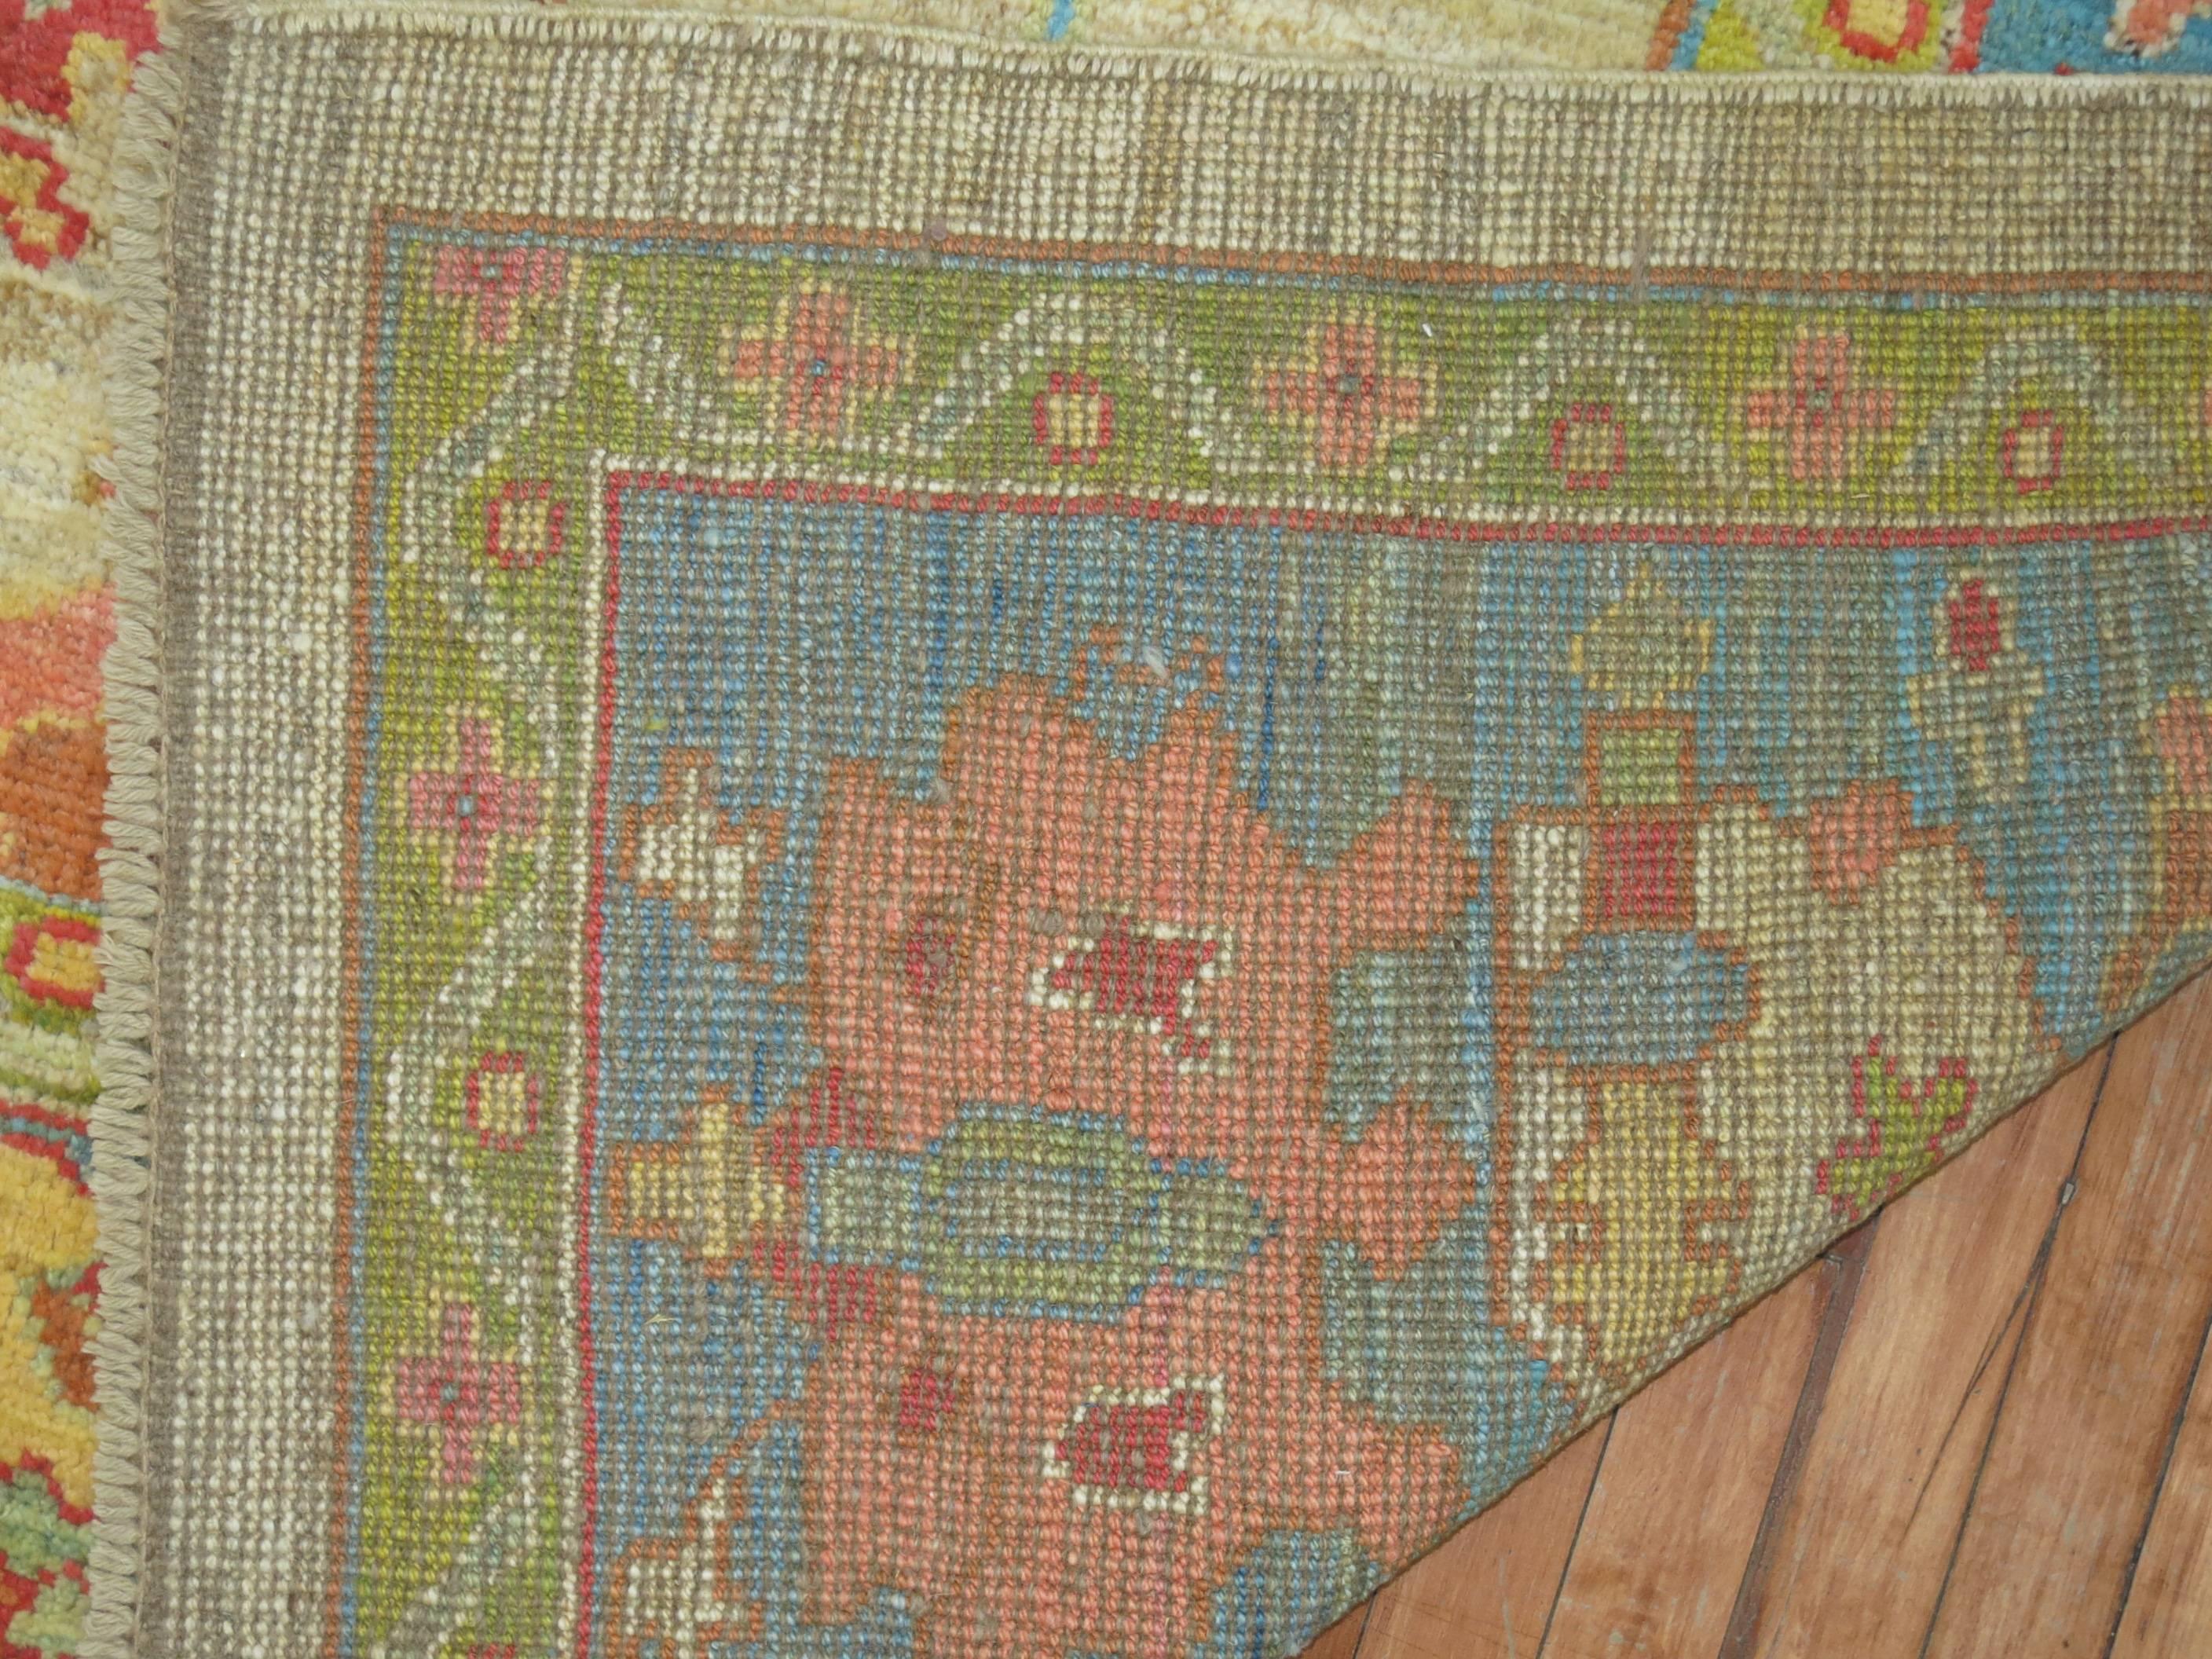 Beautiful Turkish Oushak rug featuring accents in green, blue and pinks on an abrashed ivory colored field.